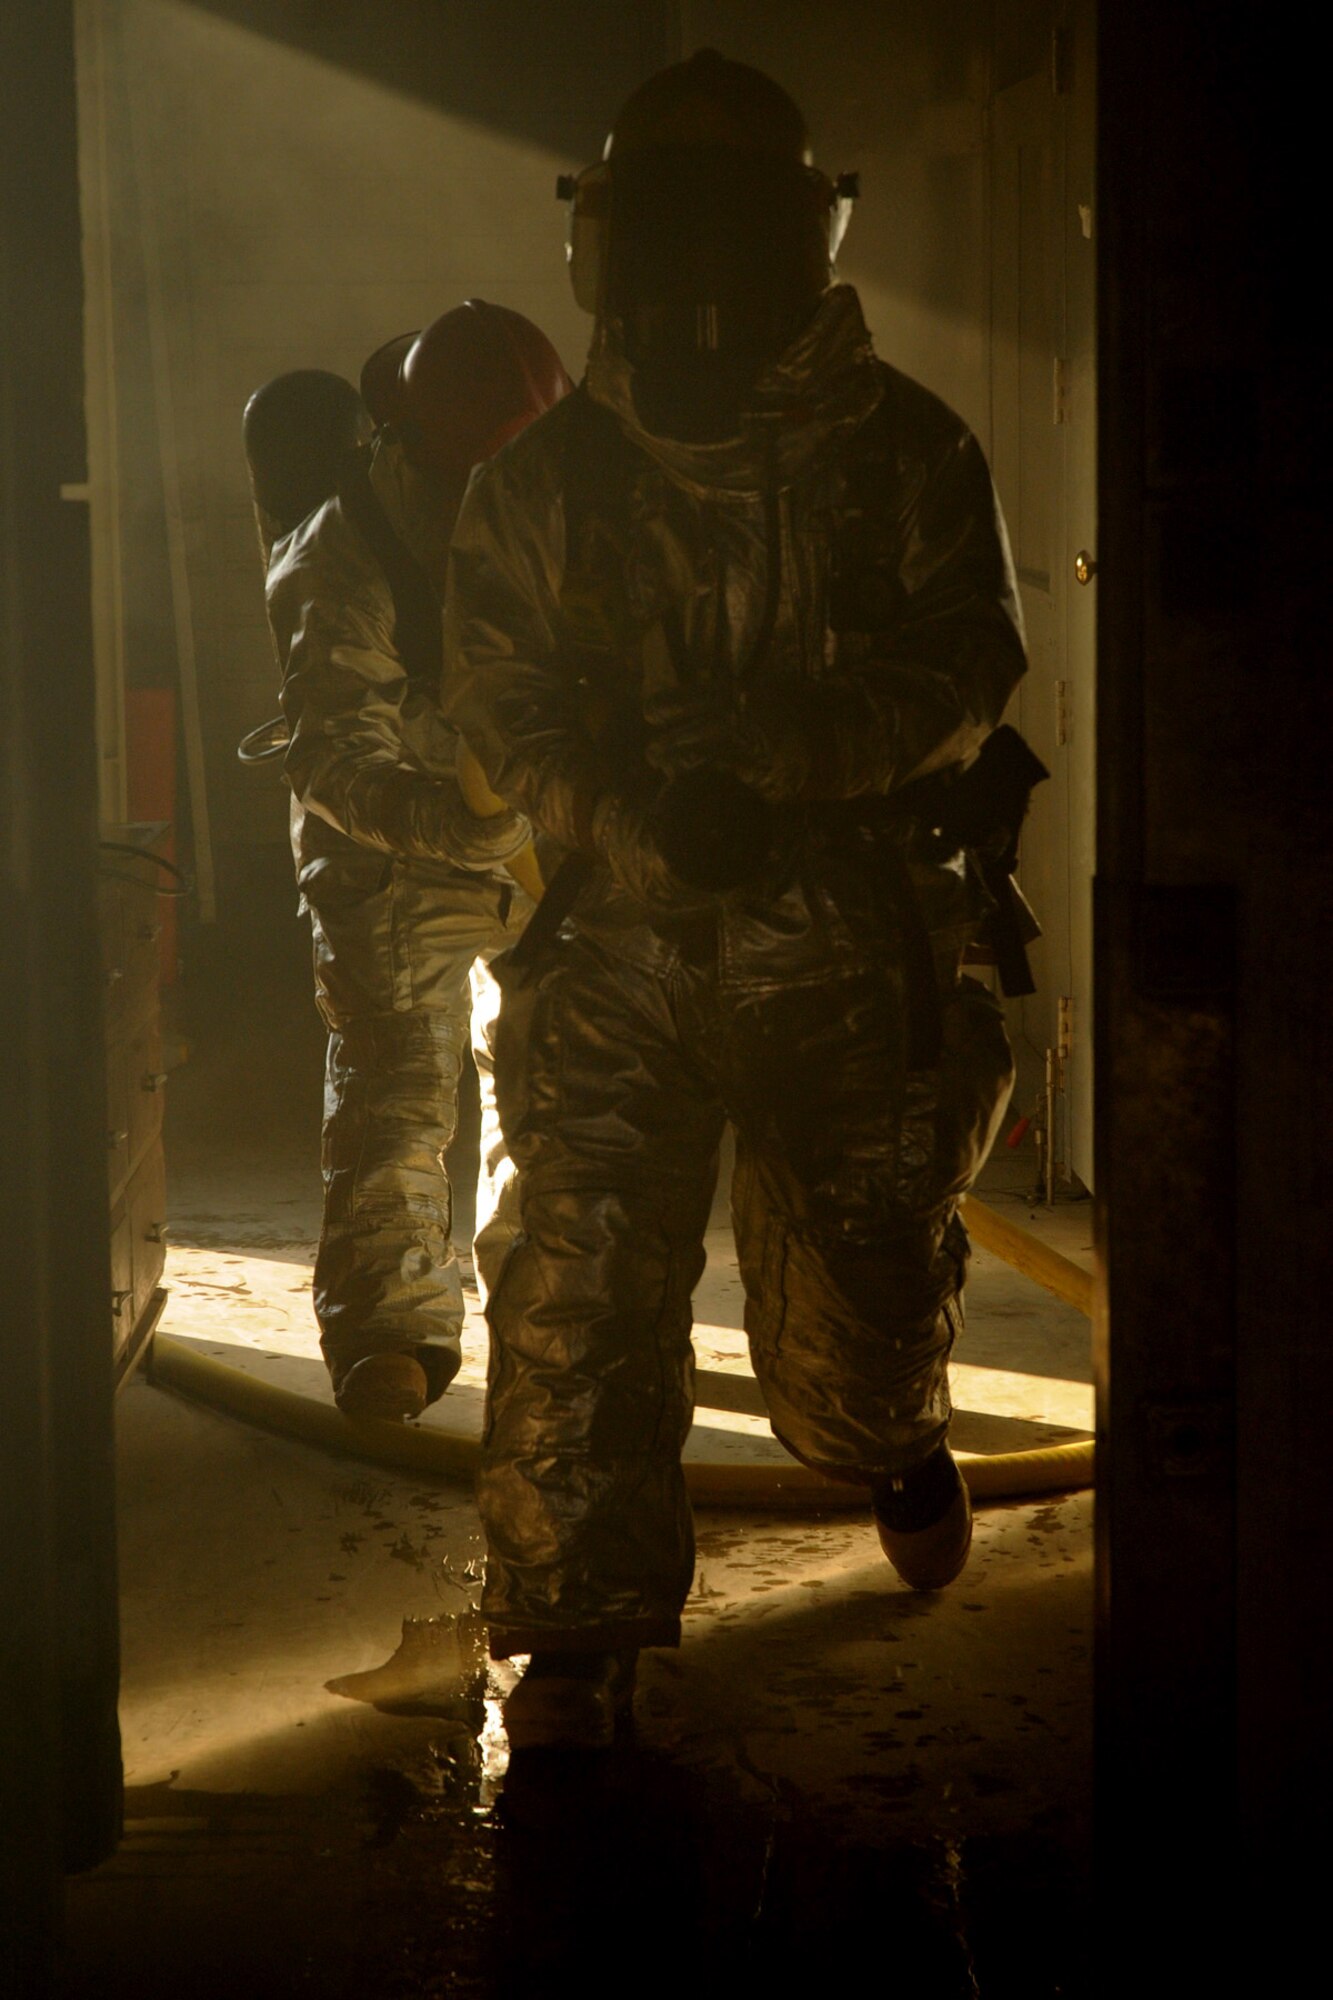 Airman 1st Class Vincent Kinard (front) and Staff Sgt. John Garcia, 18th Civil Engineering Squadron Fire Department, enter a smoke-filled room for a simulated kitchen scenario at the Silver Flag Training Facility Dec. 2 at Kadena Air Base. The 18th Wing is participating in a Local Operational Readiness Exercise to test the readiness of Kadena Airmen. (U.S. Air Force photo/Airman 1st Class Amanda Grabiec)